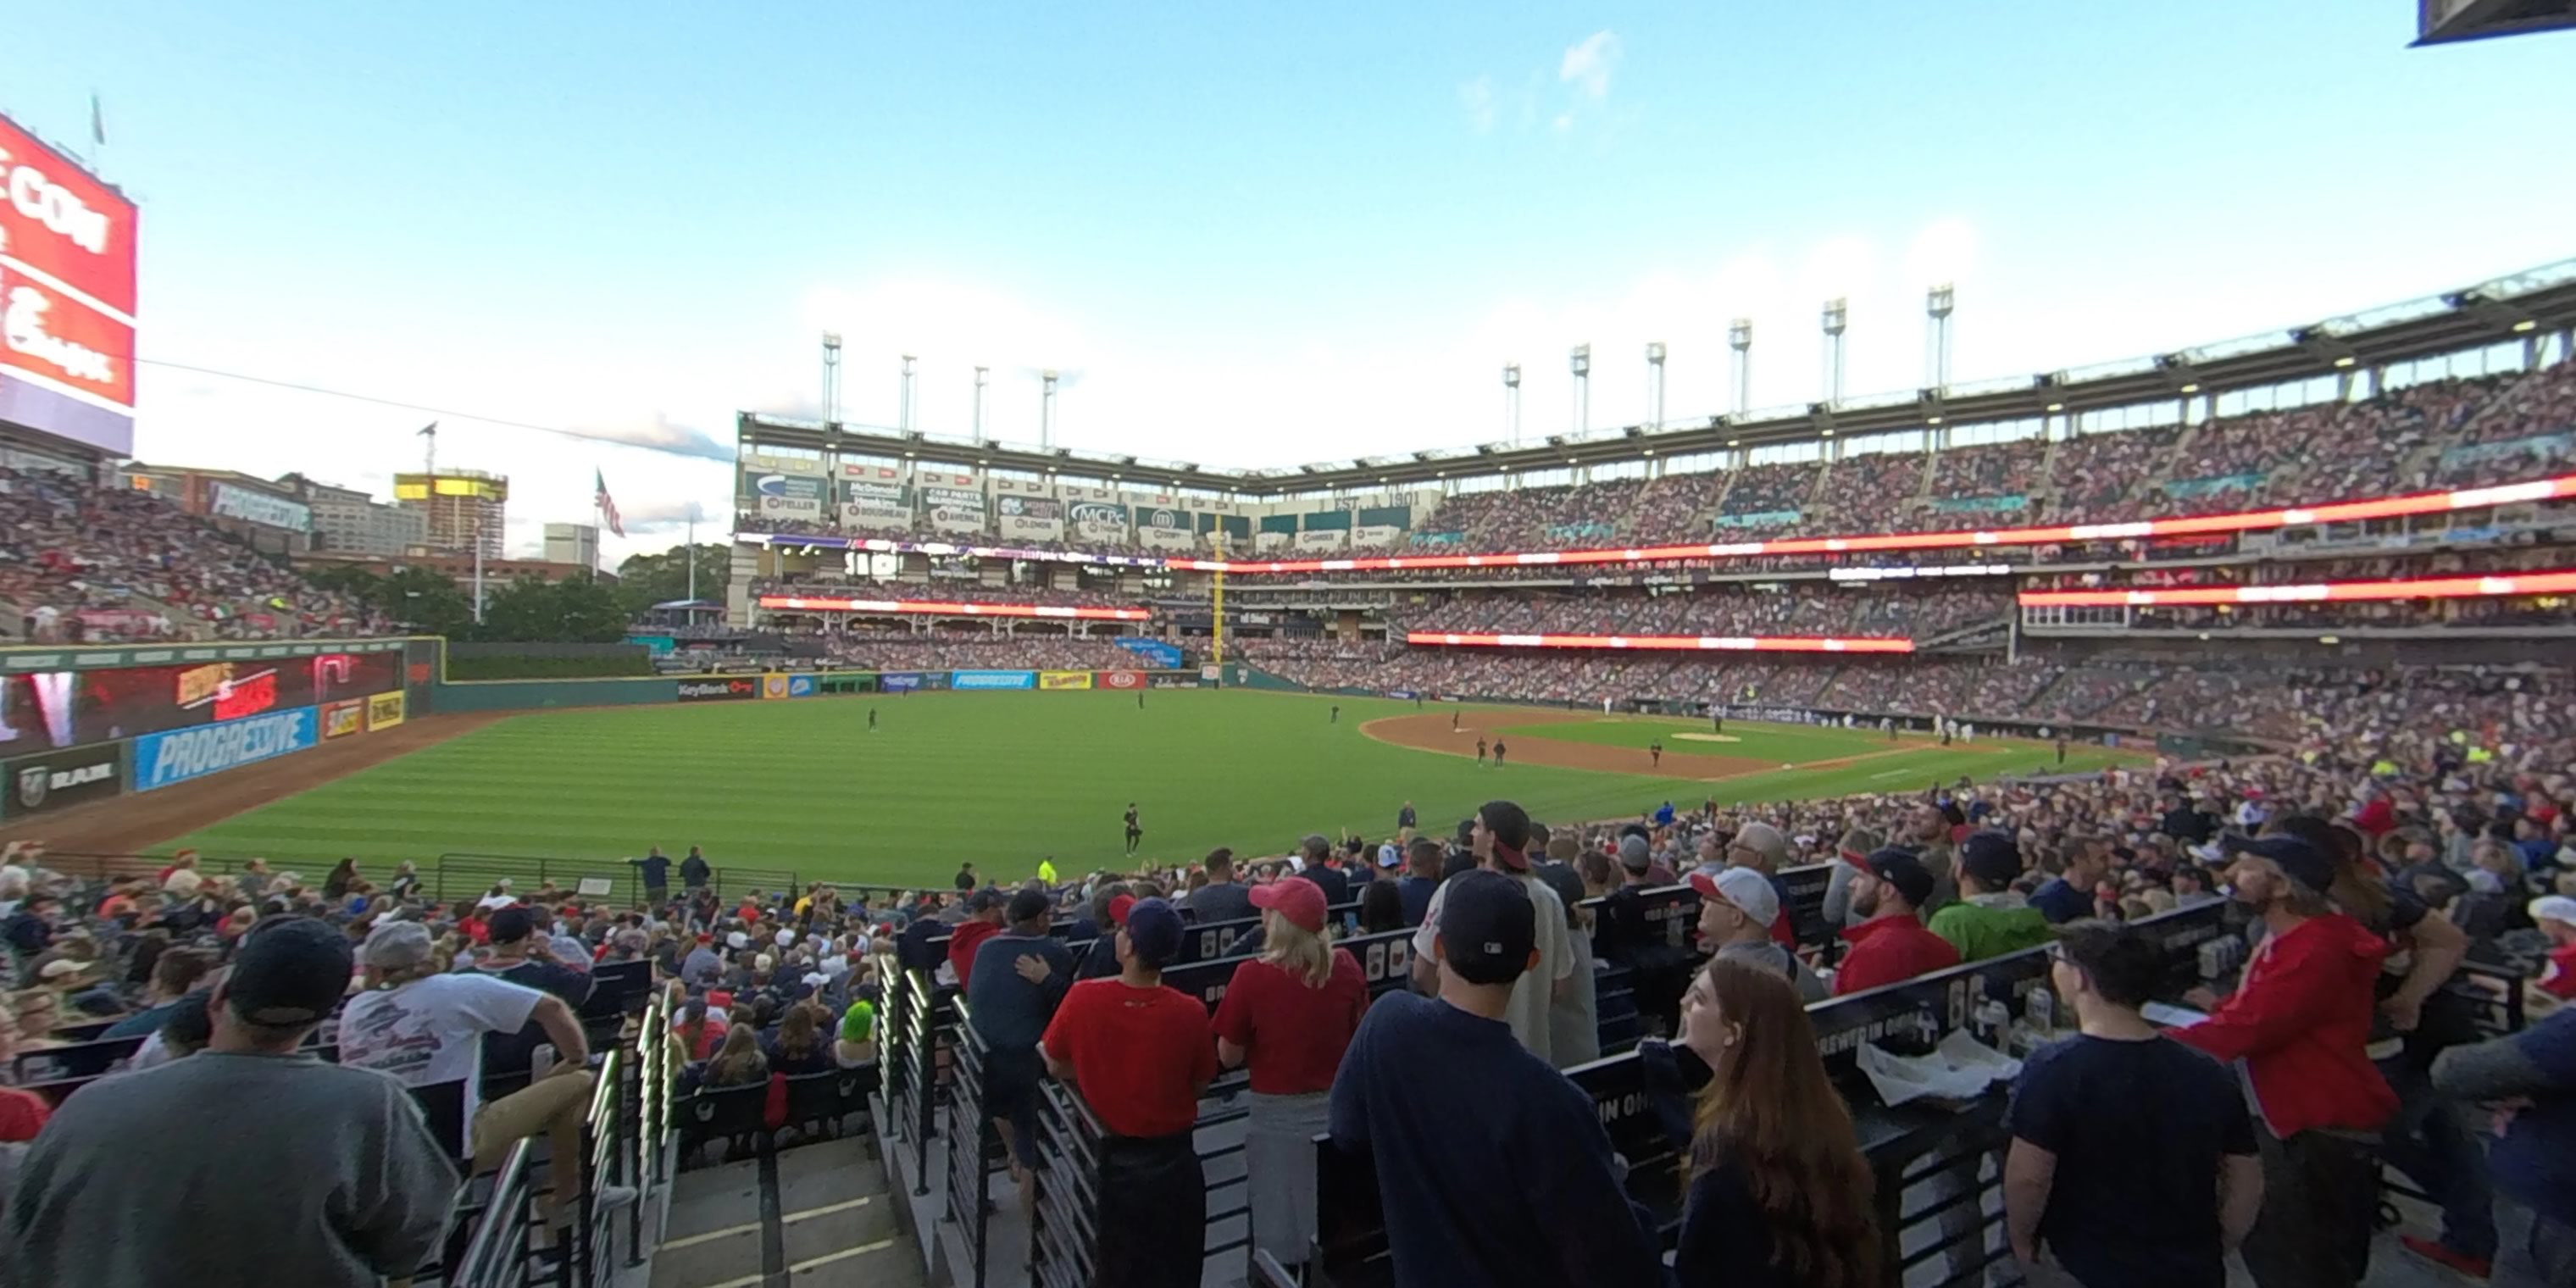 section 175 panoramic seat view  - progressive field